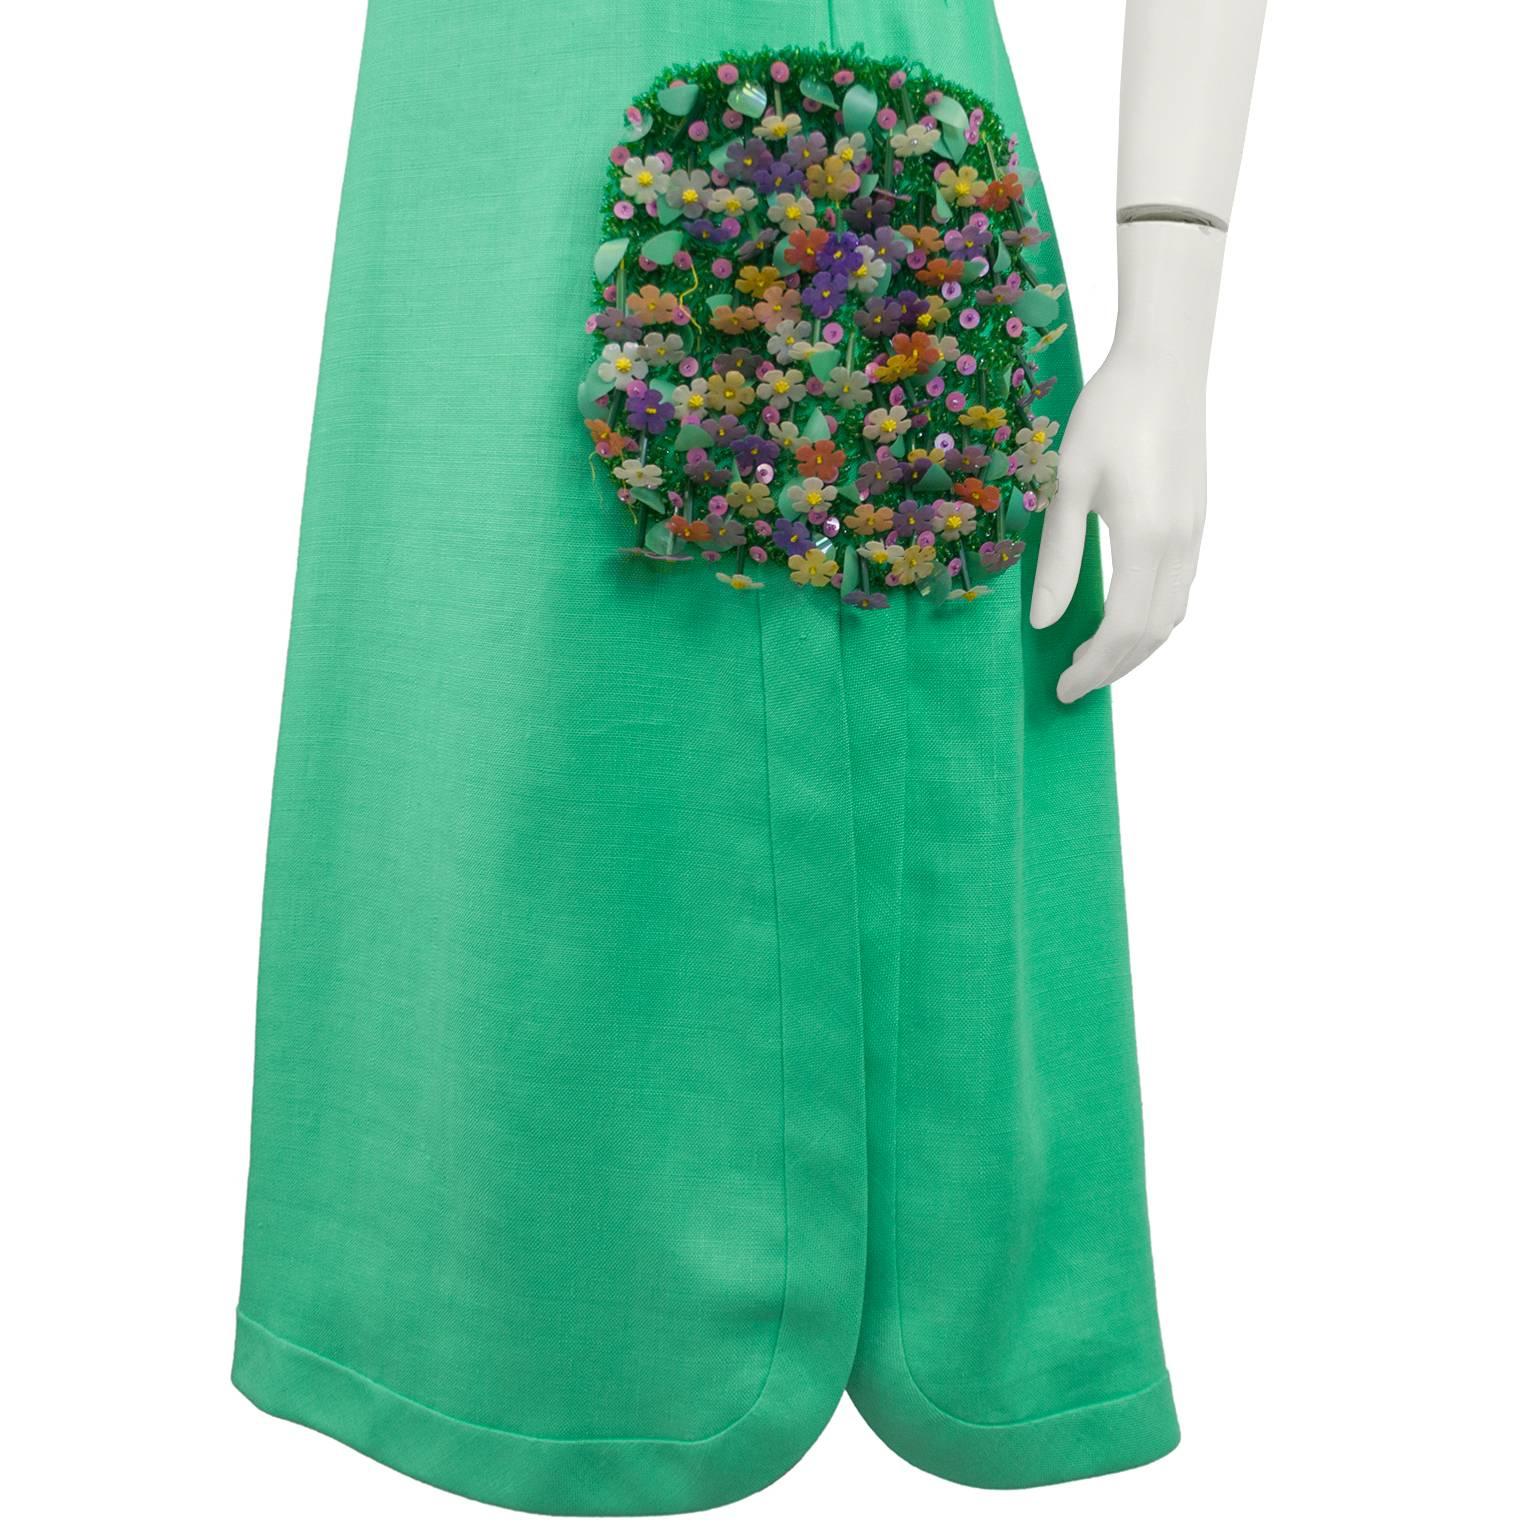 Maggy Reeves Couture Green Dress with Embellished Pocket and Handbag, 1960s  For Sale 2